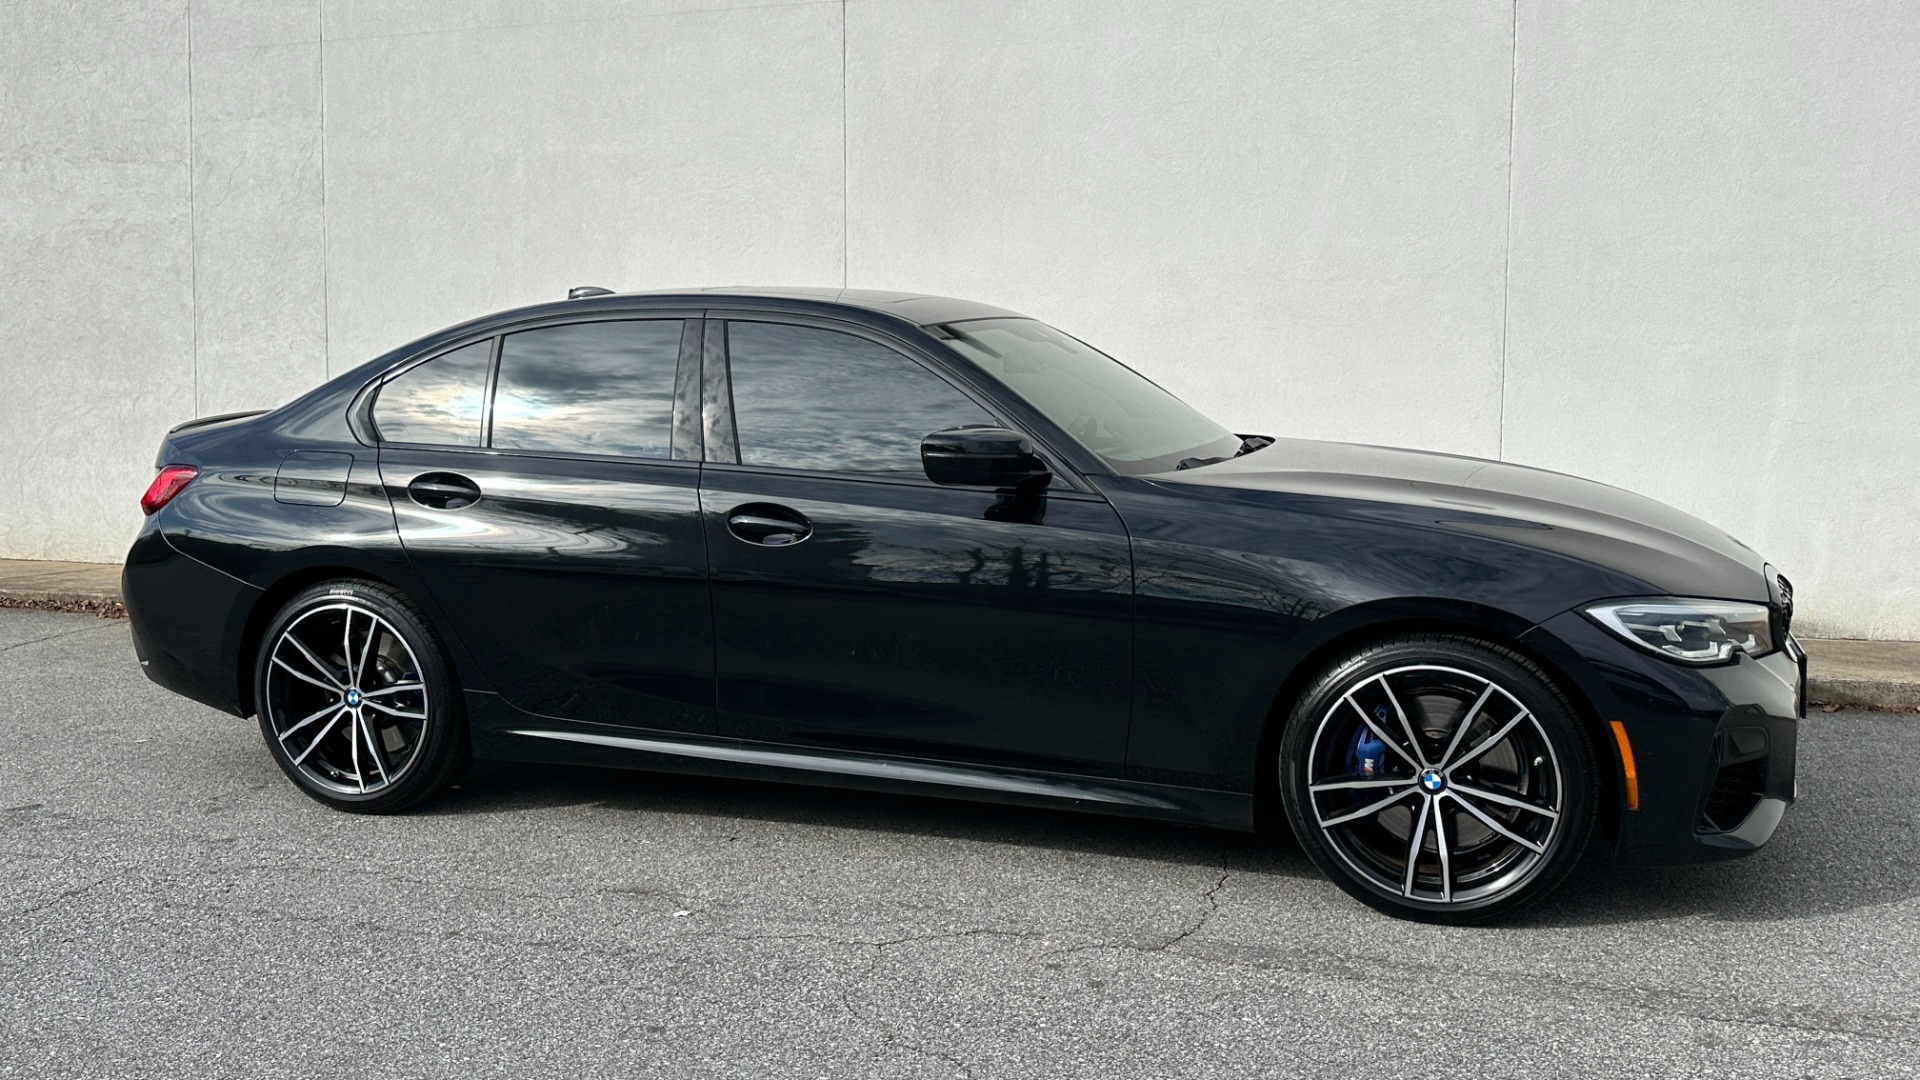 Used 2021 BMW 3 Series M340i xDrive / SHADOW-LINE / DRIVER ASSIST / HARMAN KARDON / PREMIUM PACKAG for sale $46,995 at Formula Imports in Charlotte NC 28227 5